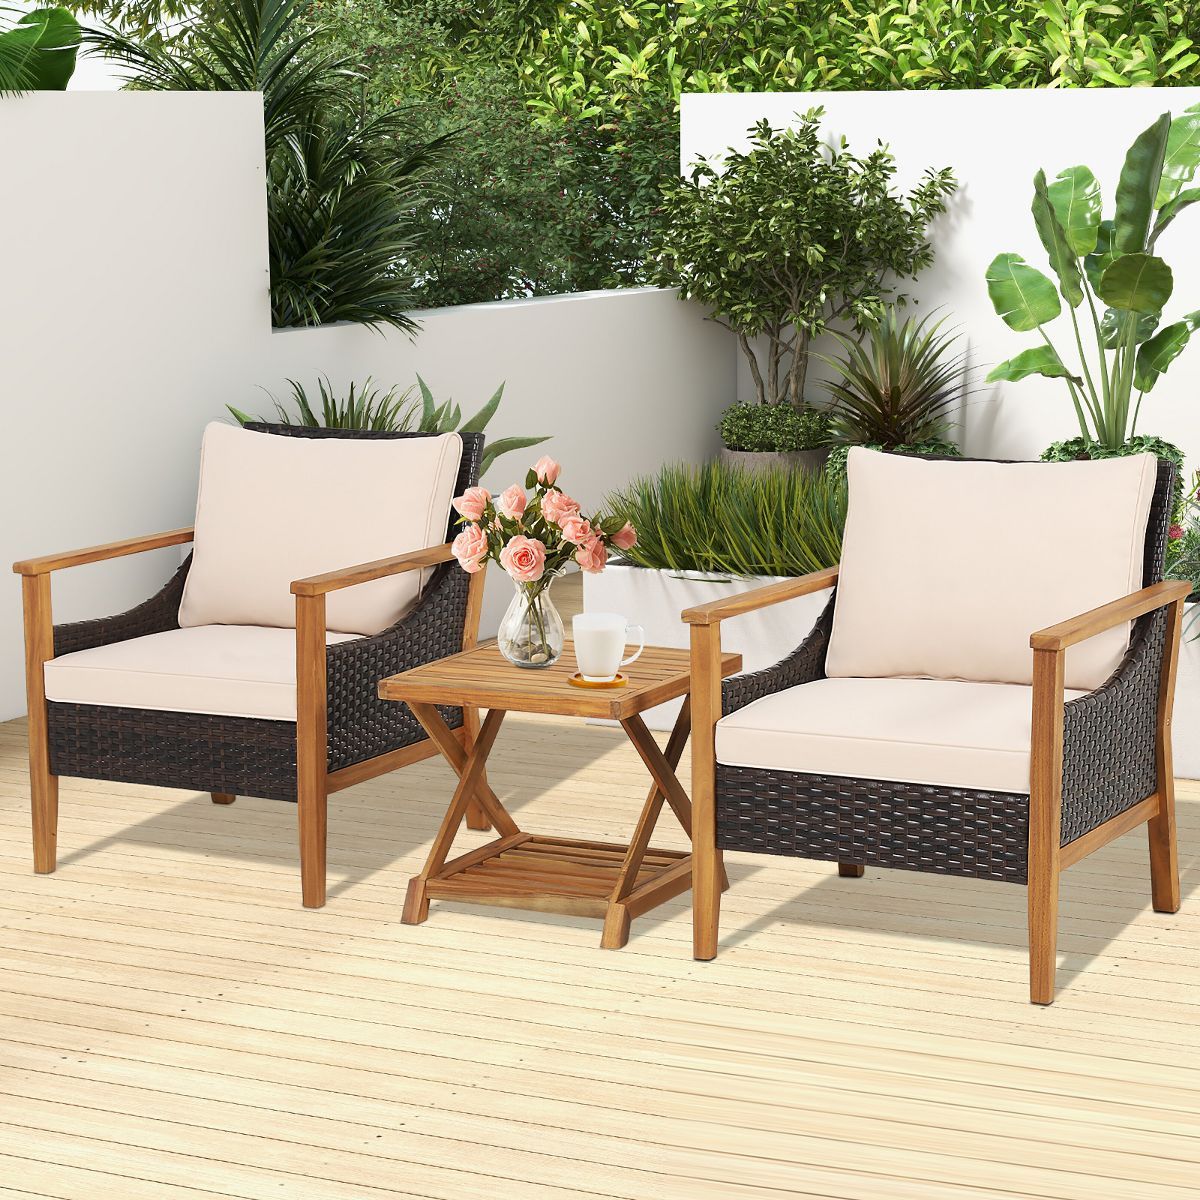 Costway 3PCS Patio Wicker Furniture Set Cushioned Armchairs with 2-Tier Side Table Balcony | Target